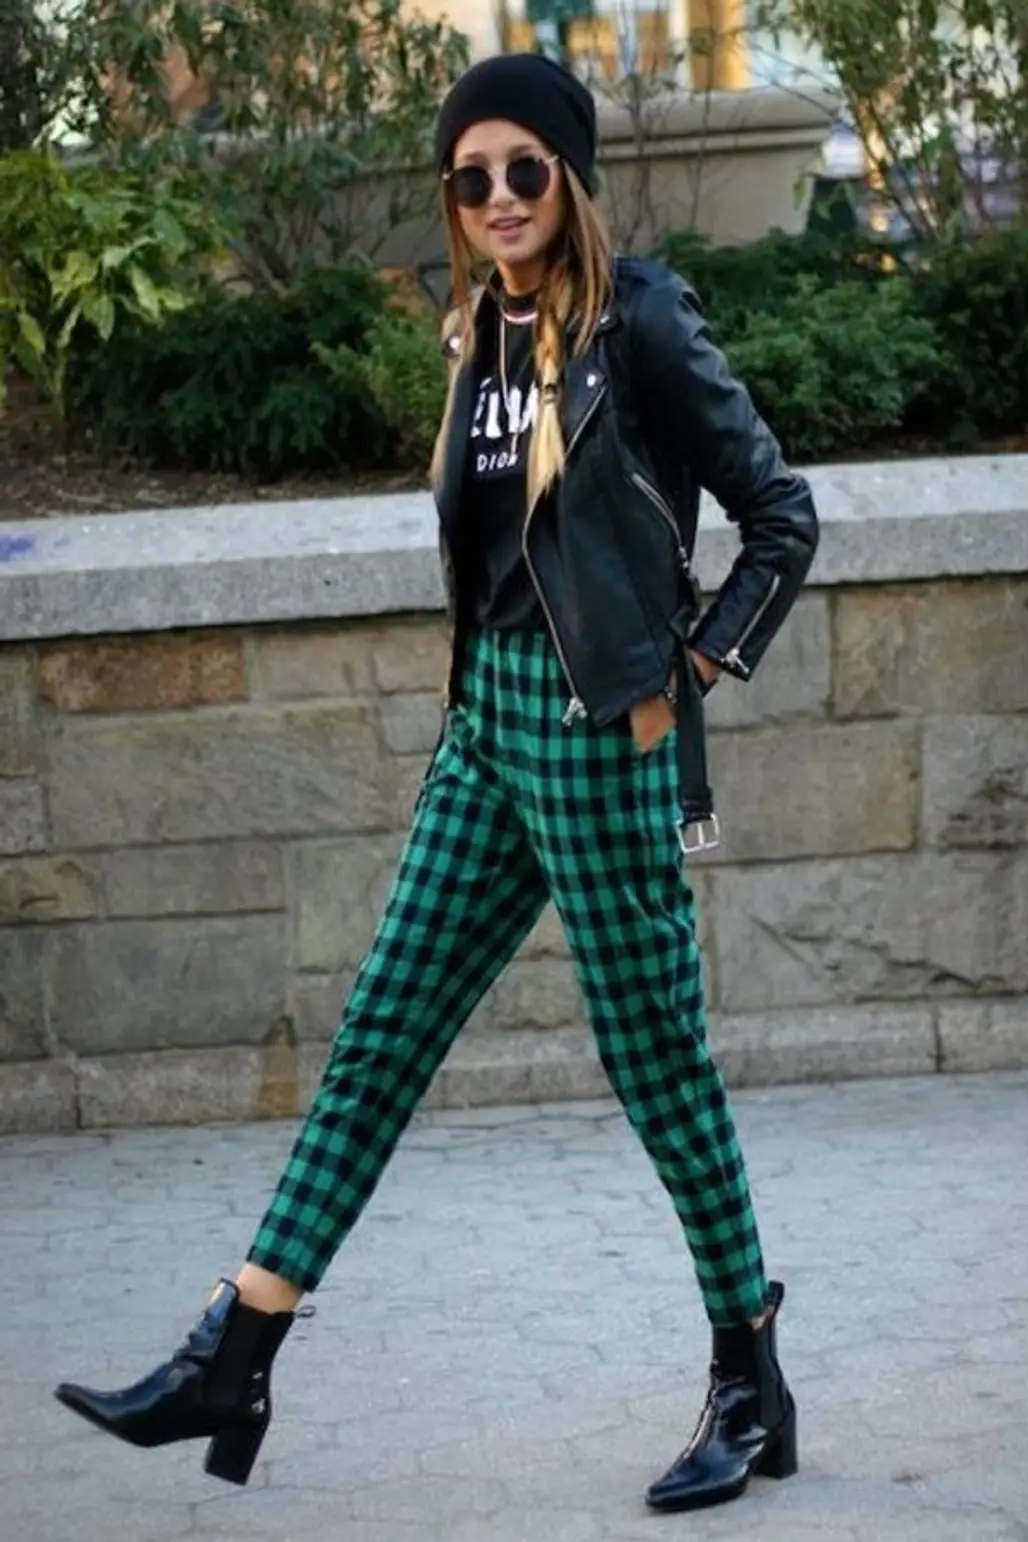 Style Points, Black & White Checkered Pants